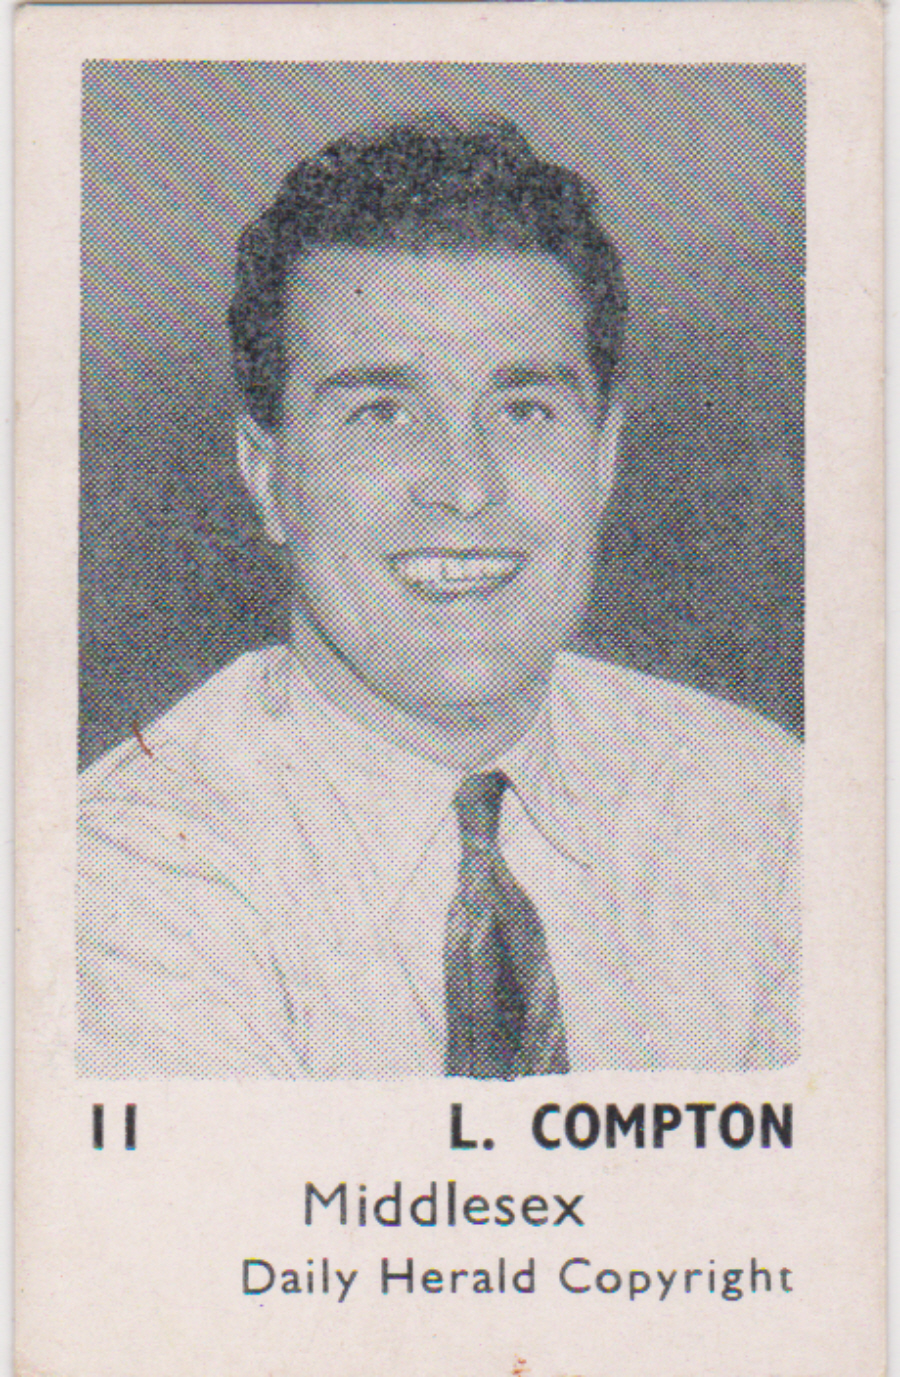 Daily Herald Cricketers No11 L Compton